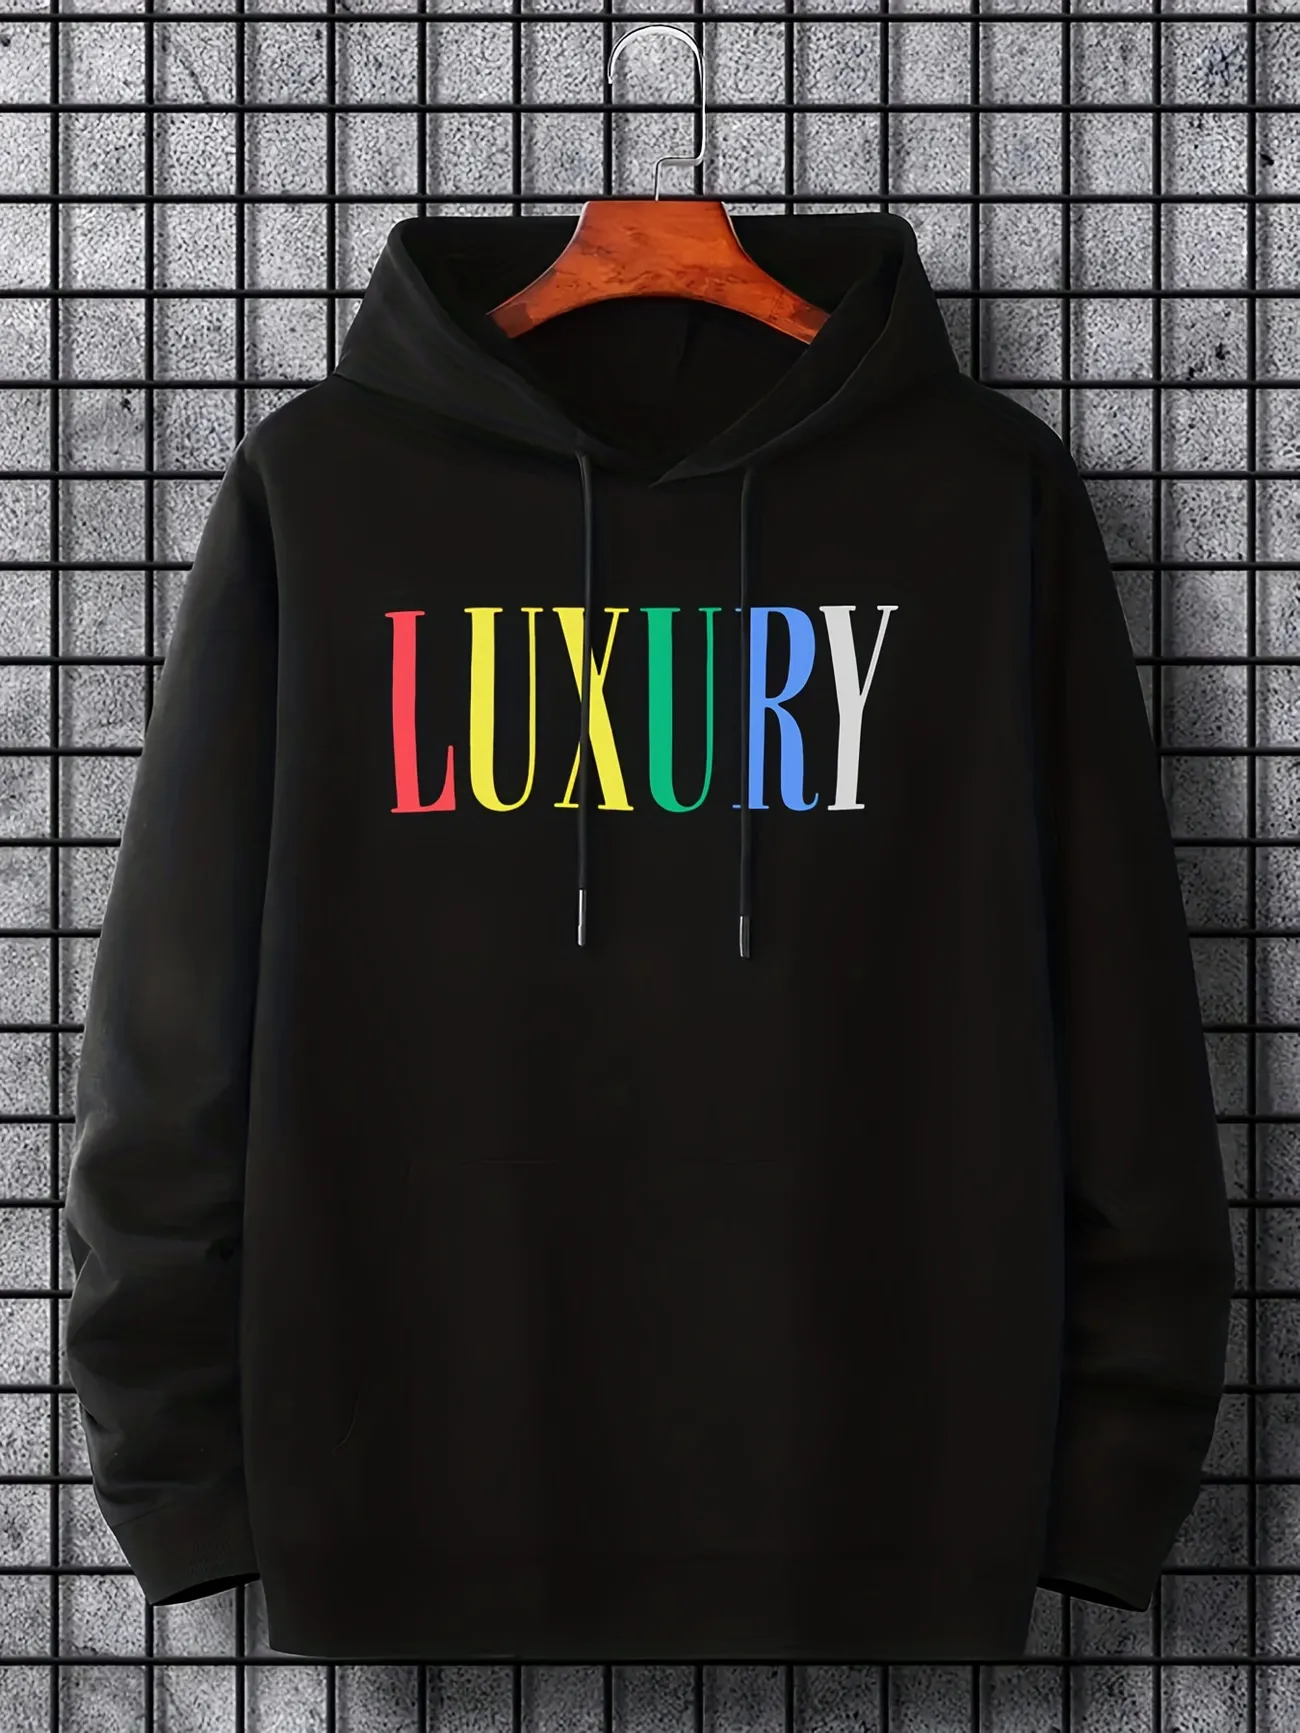 Plus Size Mens Rainbow Luxury Print Casual Hoodie Sweatshirt With Pocket  Drawstring Hooded Pullovers Sweat Shirt Mens Autumn And Winter Outfits, Discounts For Everyone